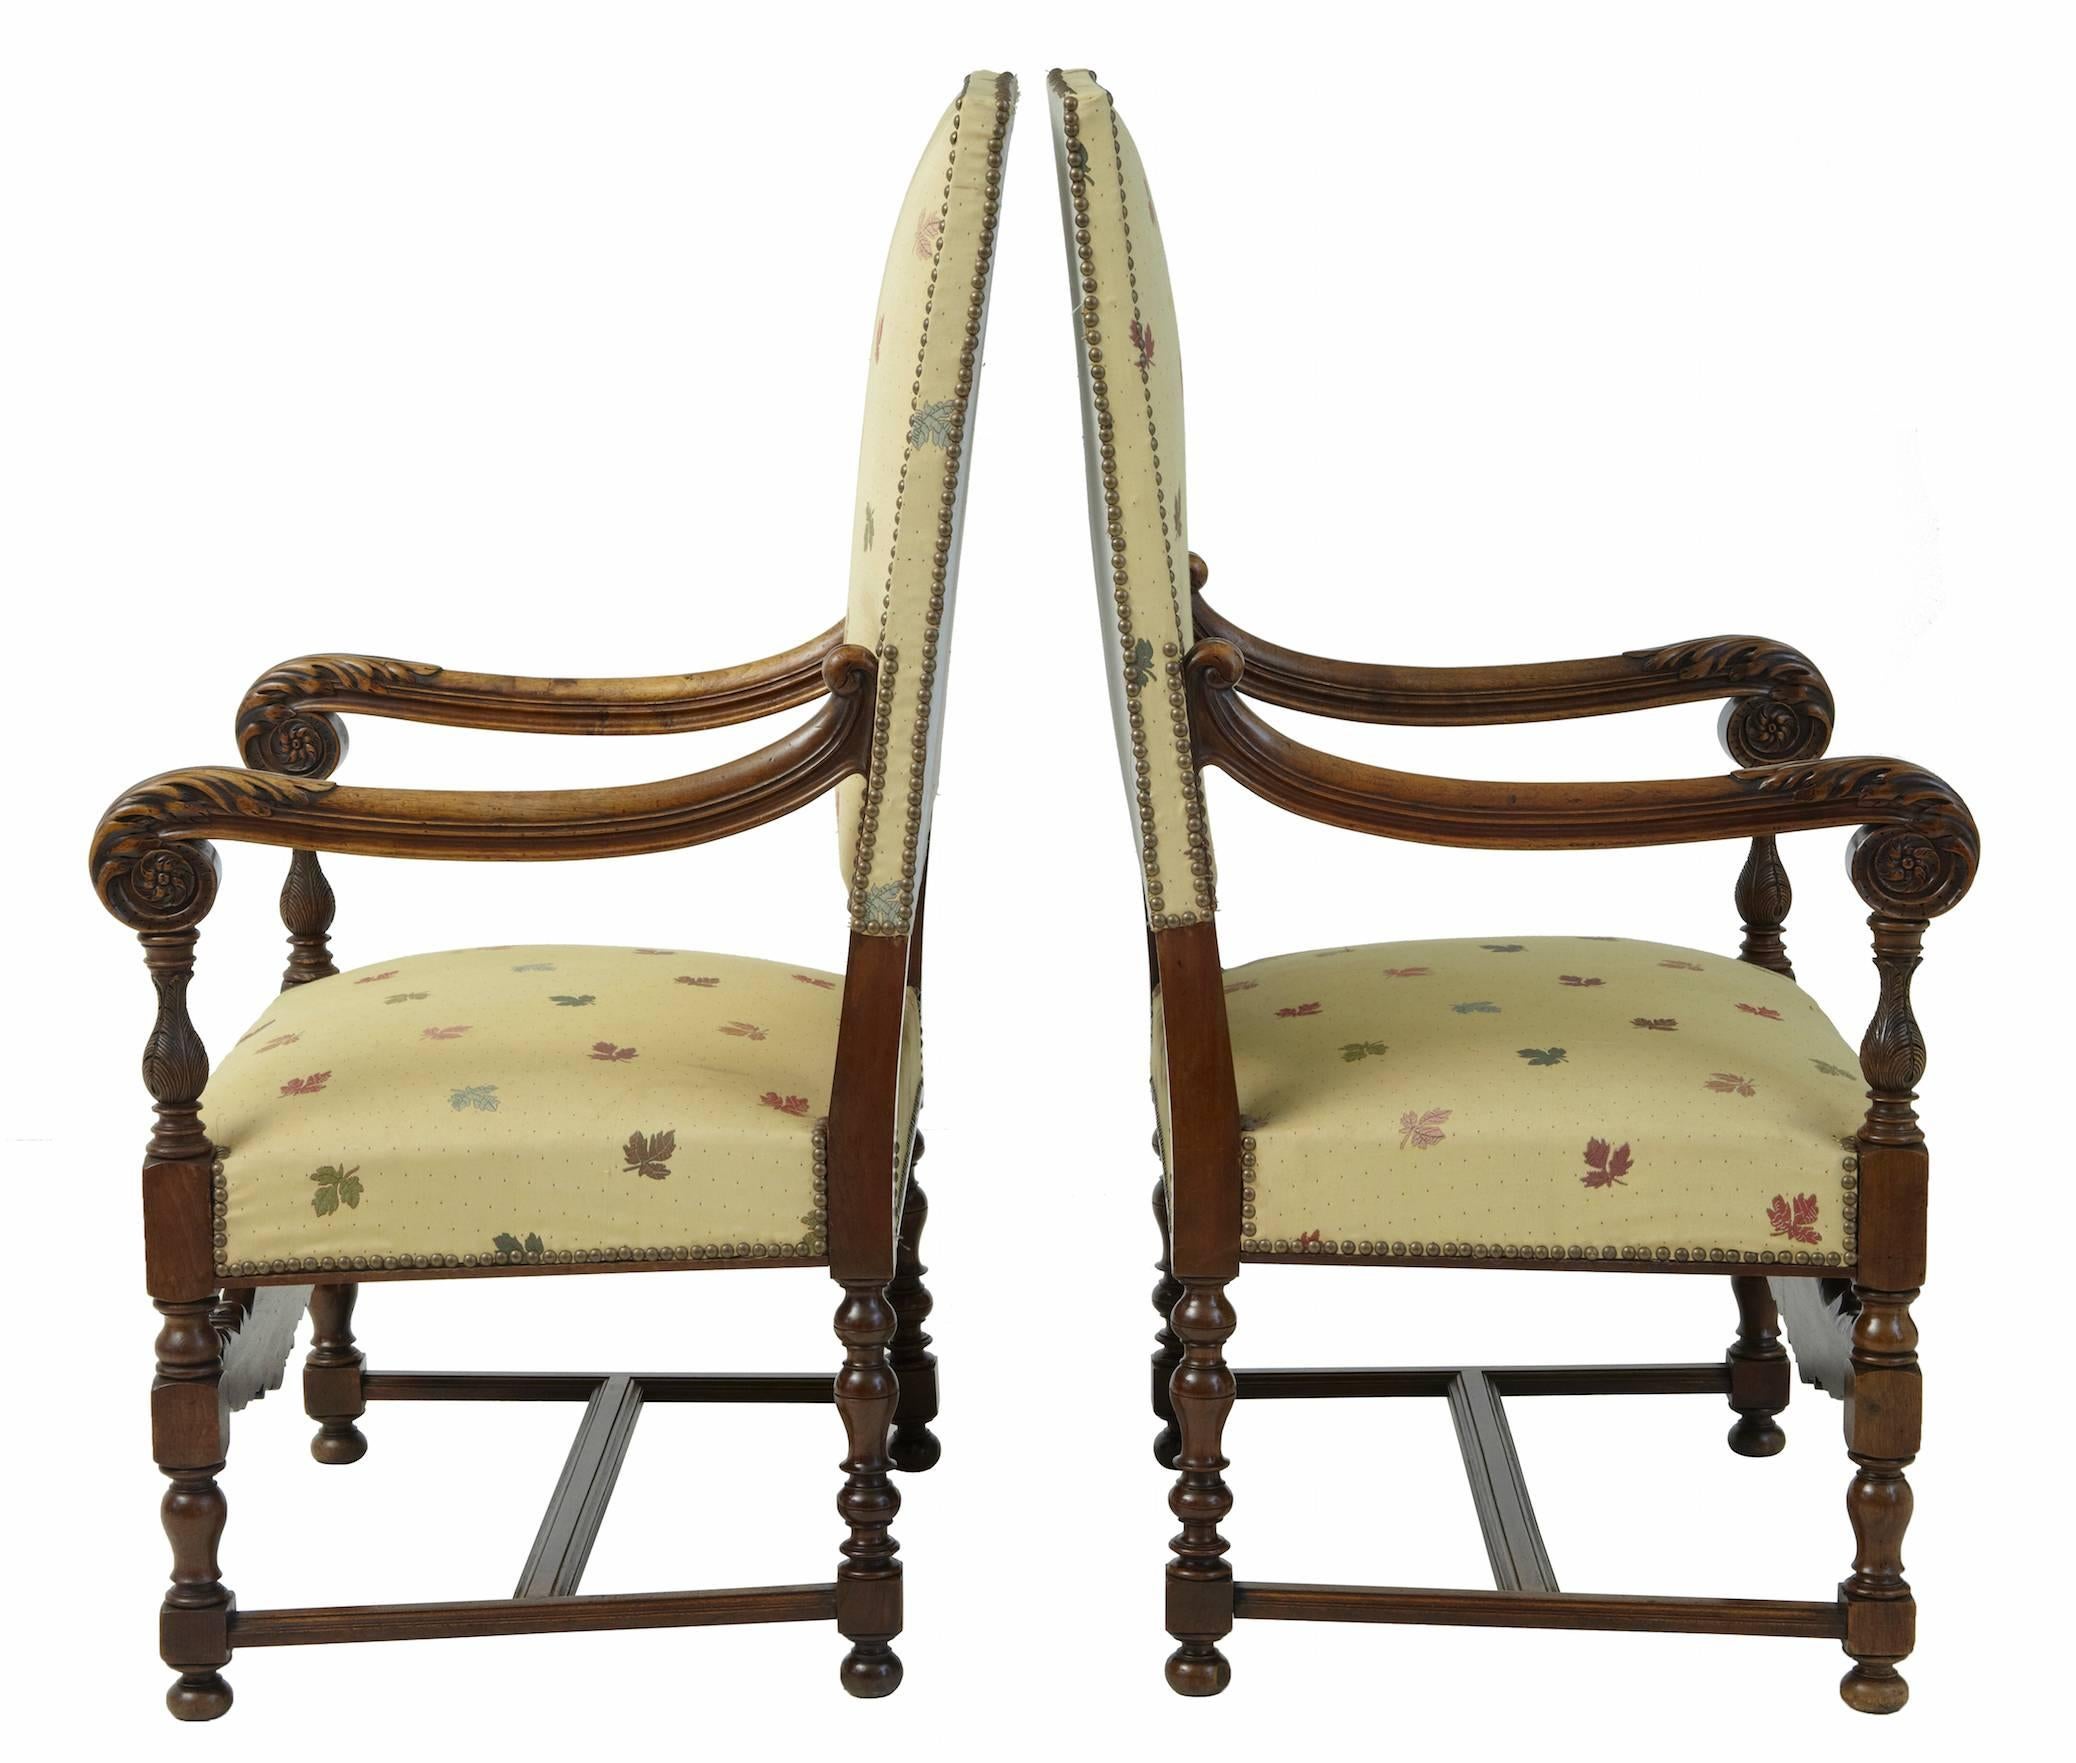 Stunning pair of slightly oversized French armchairs, circa 1880.
Beautifully carved to the lower back and front rail. Scrolling arms with turned supports.
Standing on four turned legs united by H-frame stretcher.

Measures: Height 46